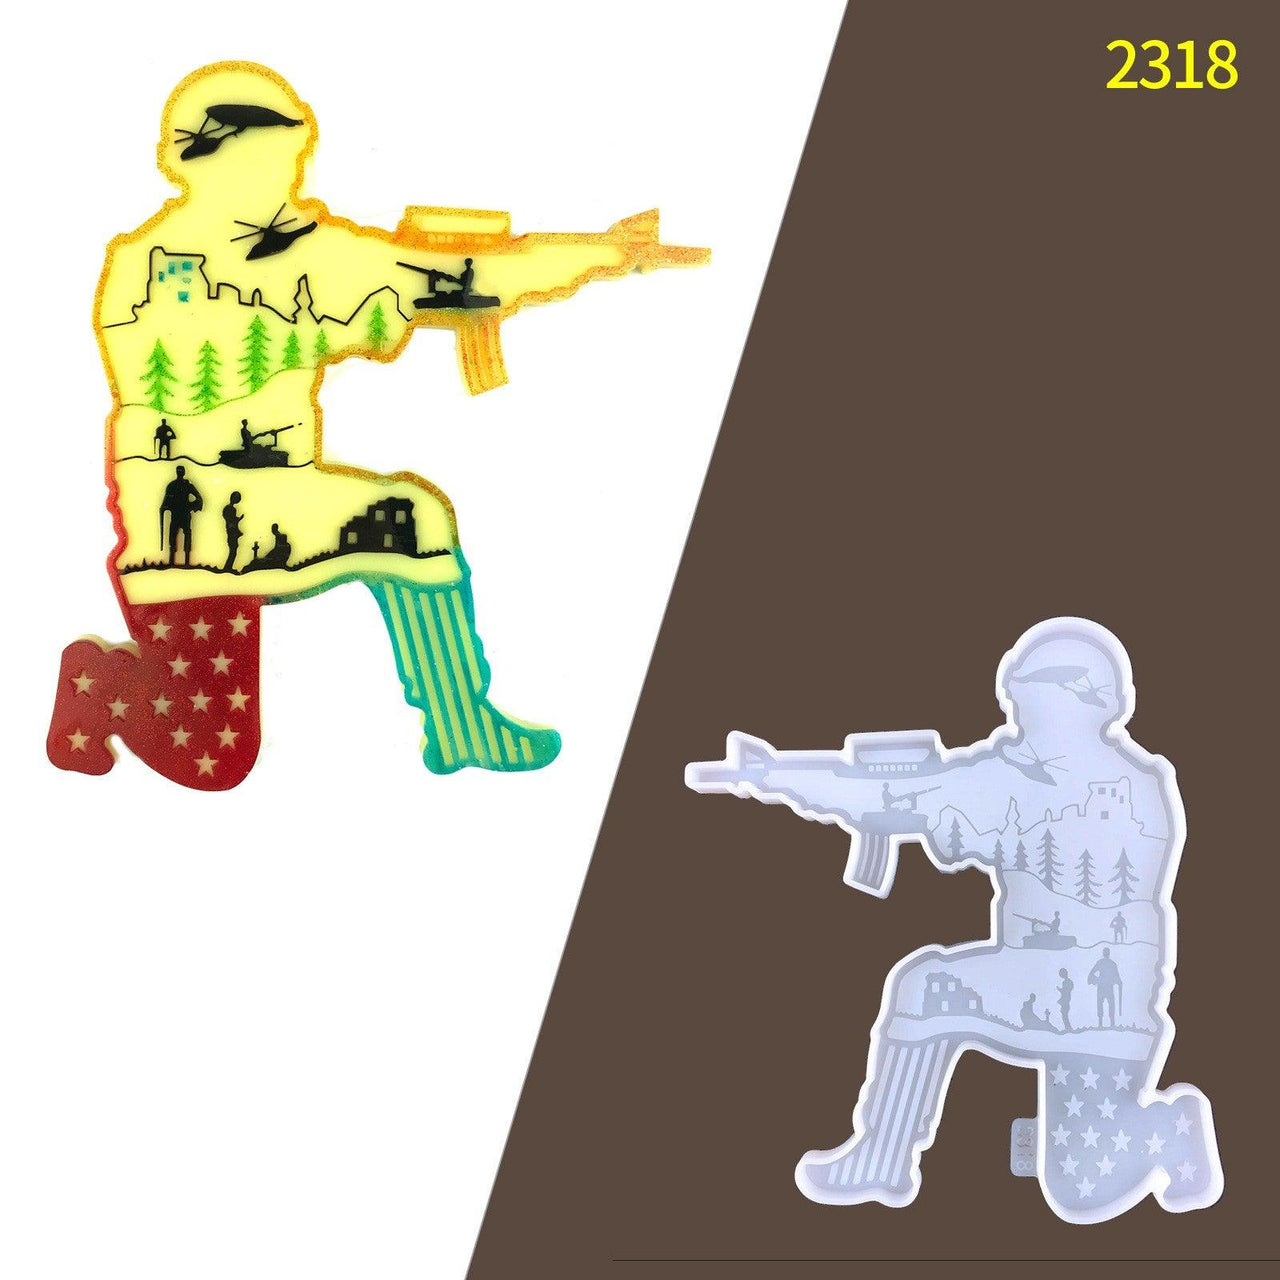 USA Soldier Decoration Mold for Epoxy Resin - Military Display Mold - Resin Mold U.S CLEARENCE - Art By Suleny Craft Store LLC